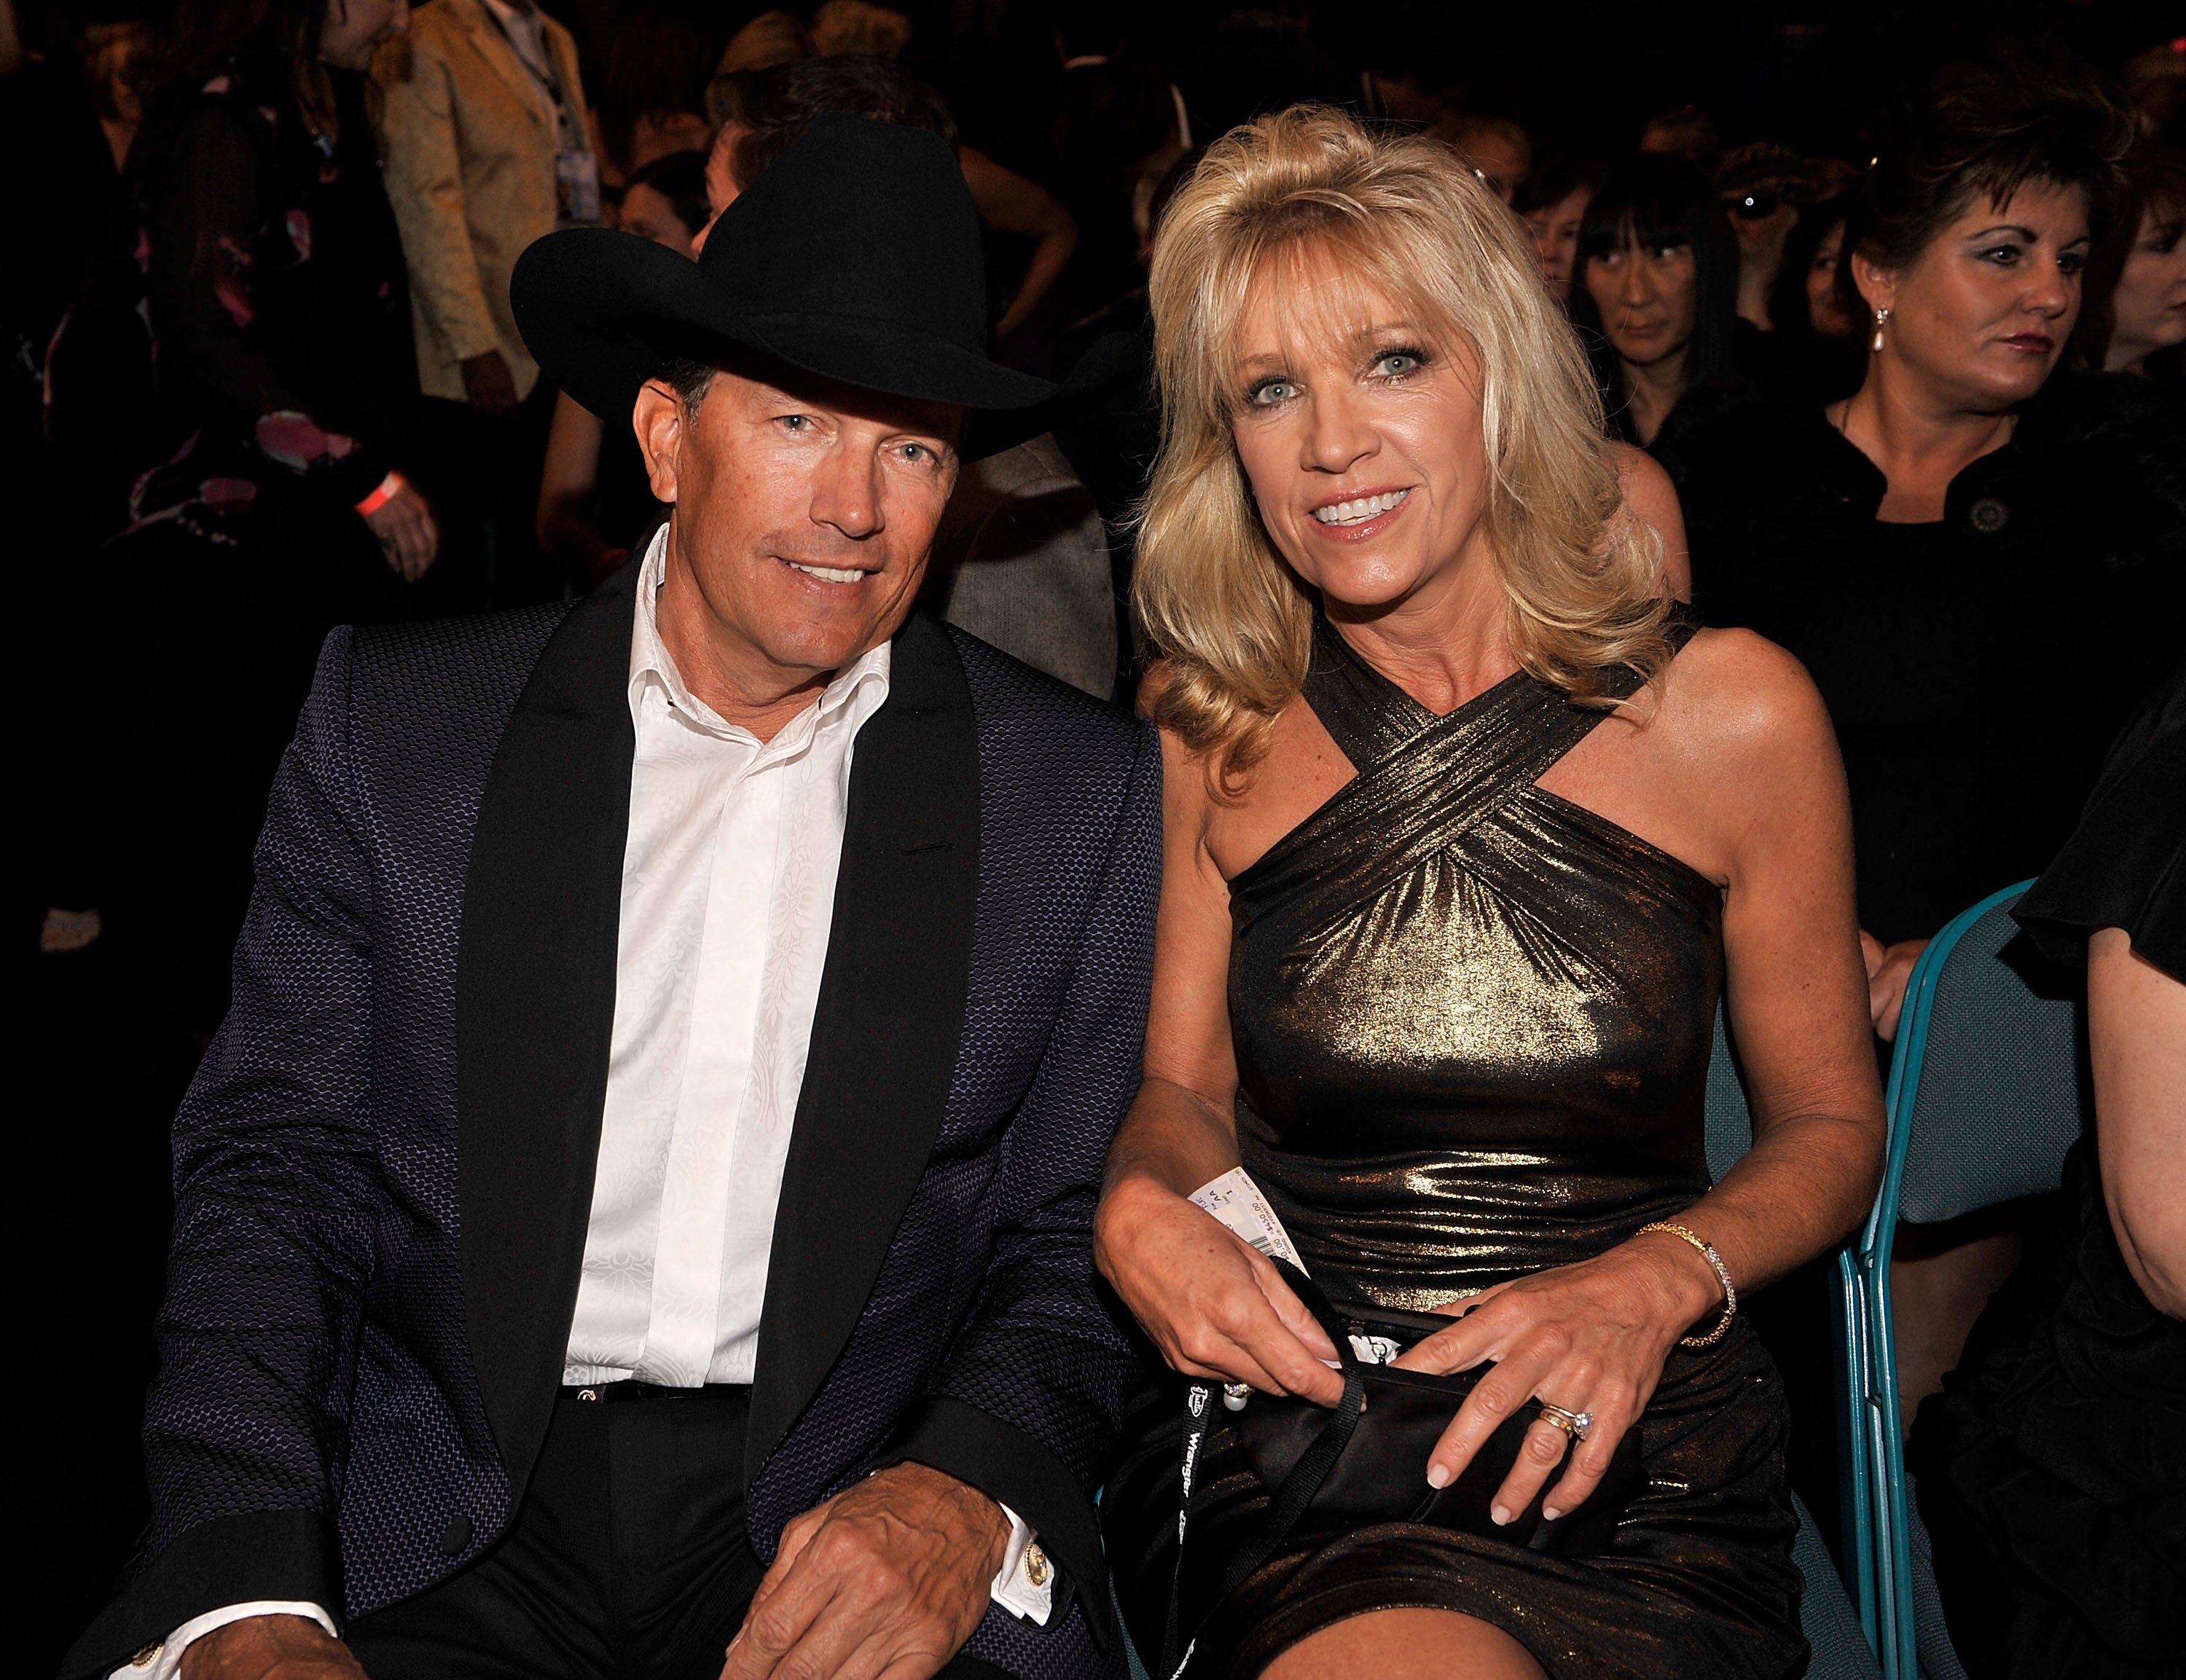 George Strait and wife Norma Strait during the 44th annual Academy Of Country Music Awards held at the MGM Grand. | Source: Getty Images